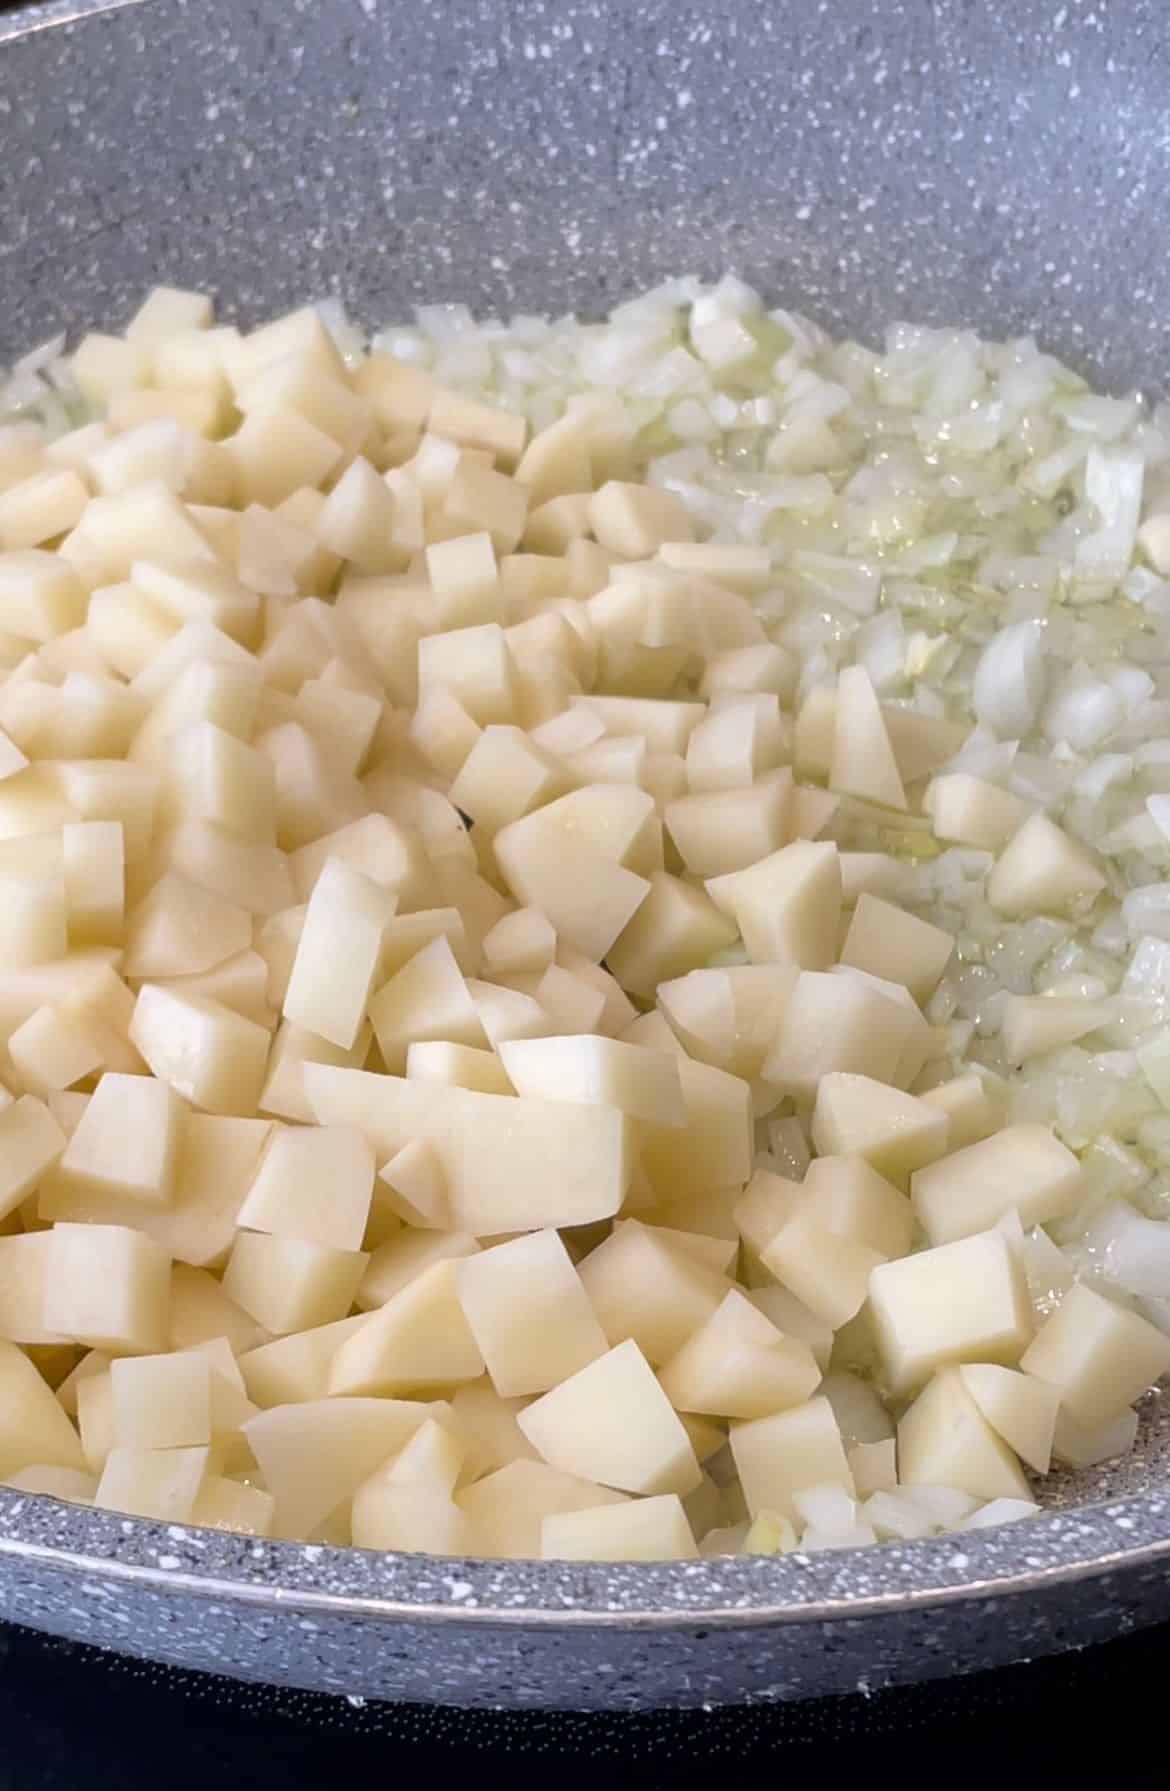 cubed potatoes that are added to a skillet of sautéed onions